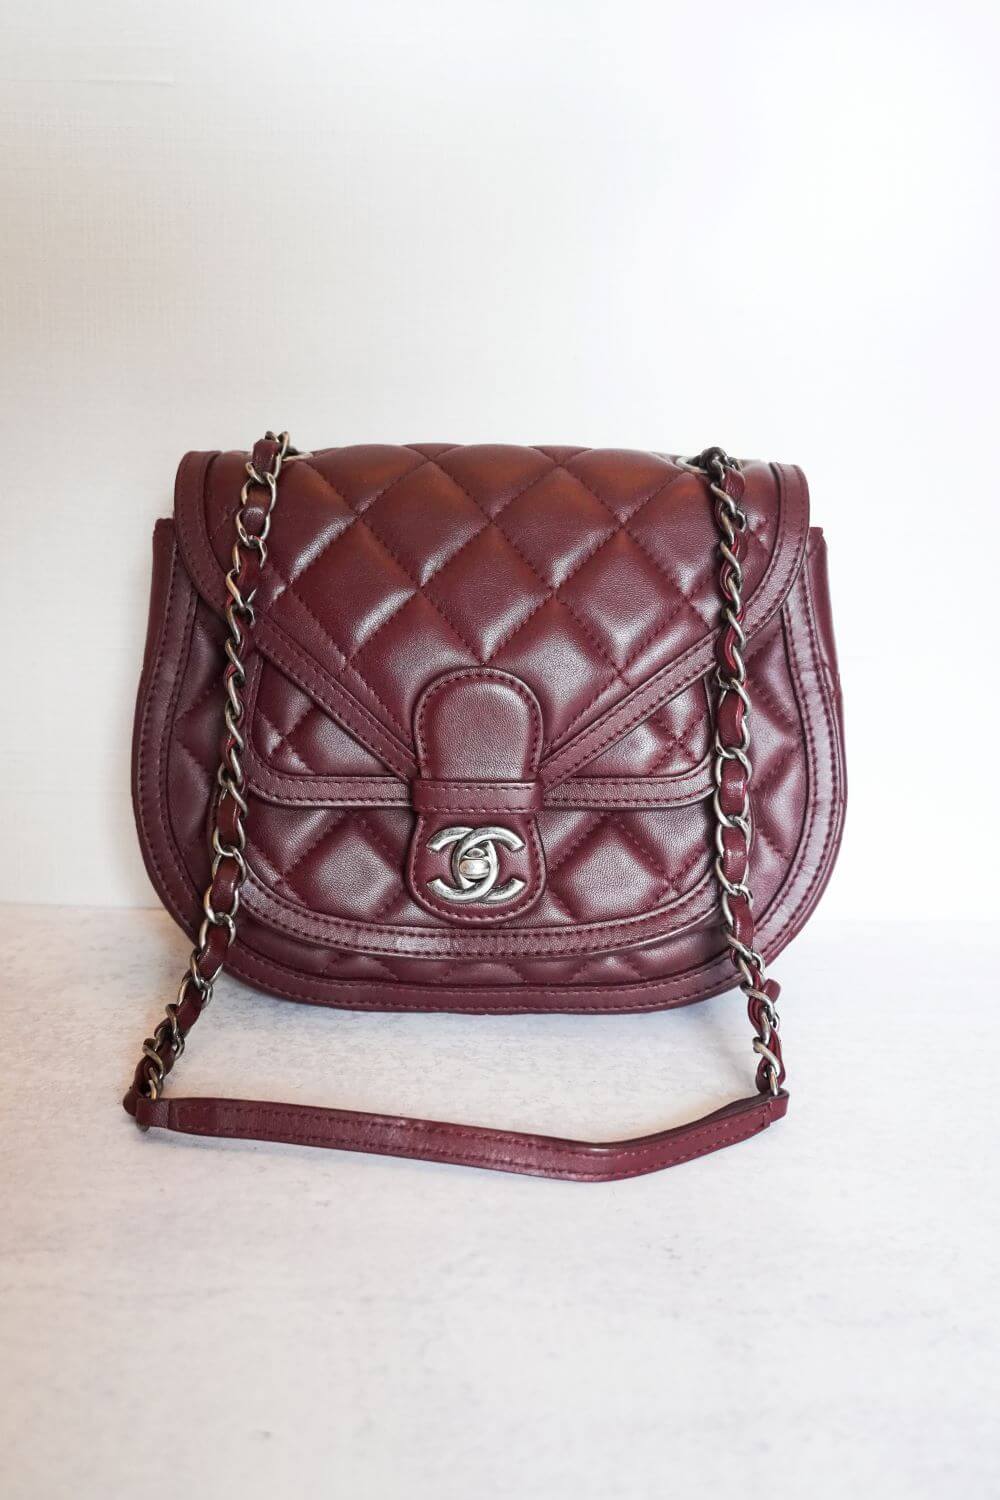 Chanel Red CC Quilted Leather Chain Flap Bag Chanel